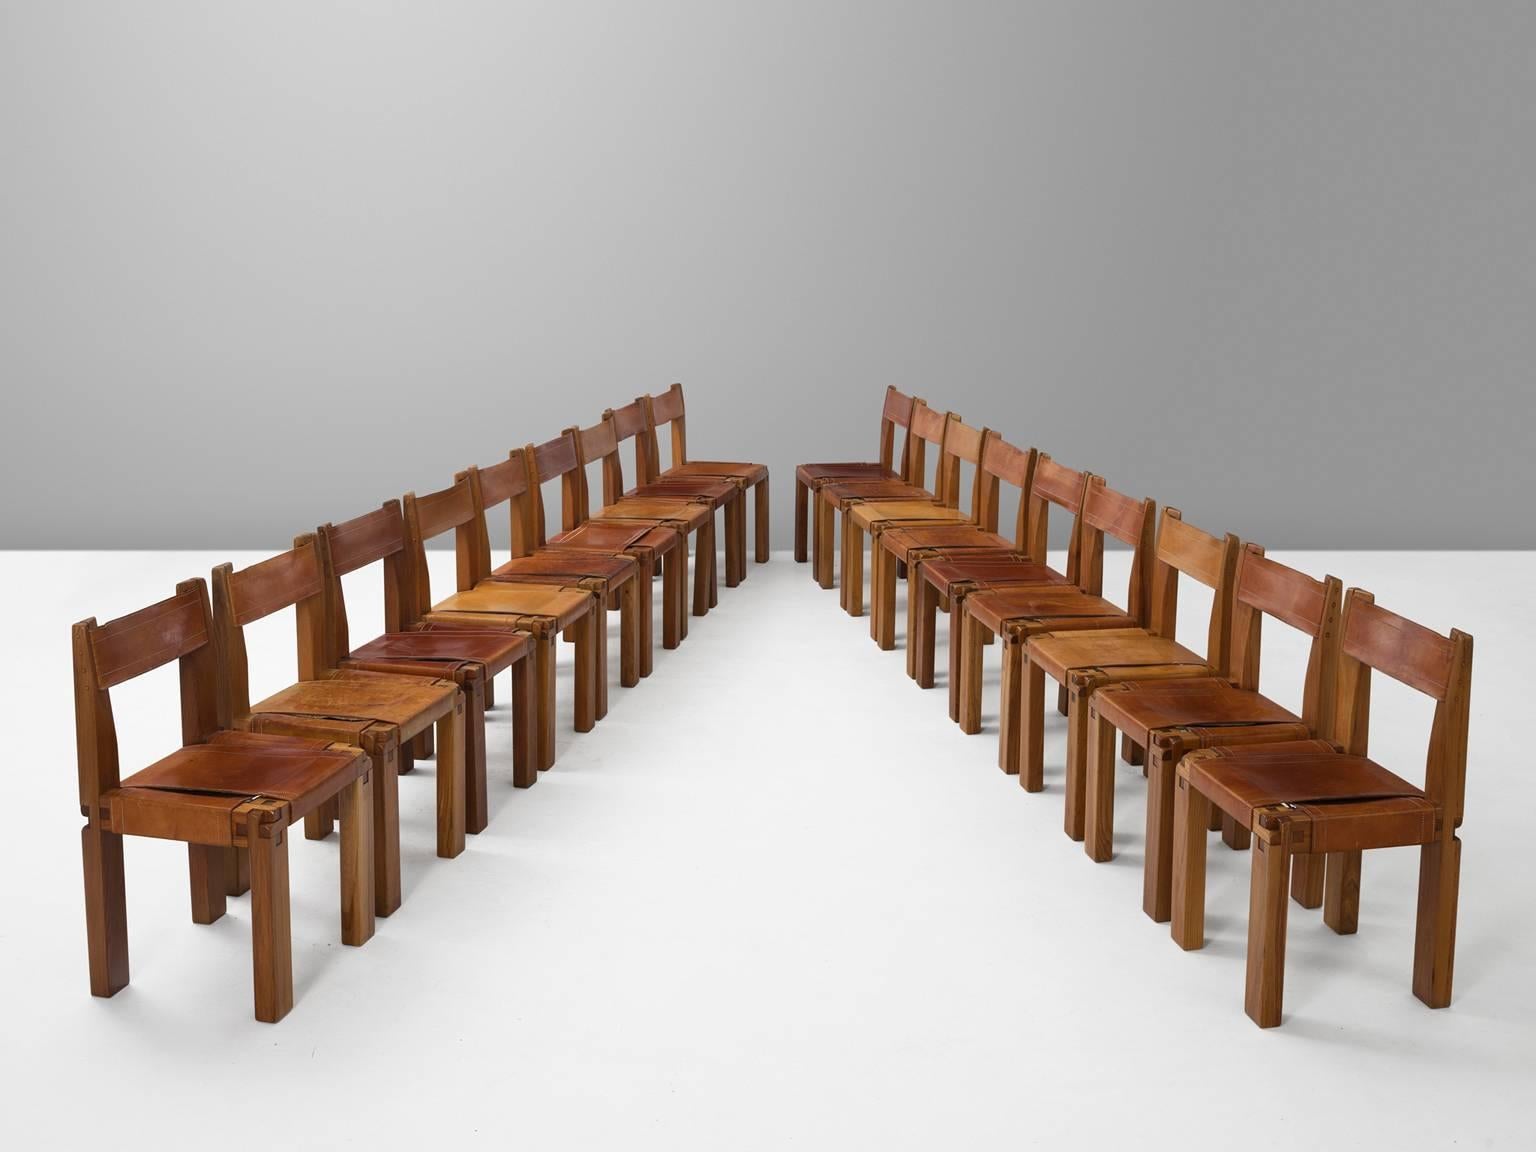 Set of 18 chairs, model S11, in elm and leather, by Pierre Chapo, France, circa 1955.

Large set of 18 chairs in solid elmwood with saddle leather seating and back. Designed by French designer Pierre Chapo for Atelier Chapo, Paris. These chairs